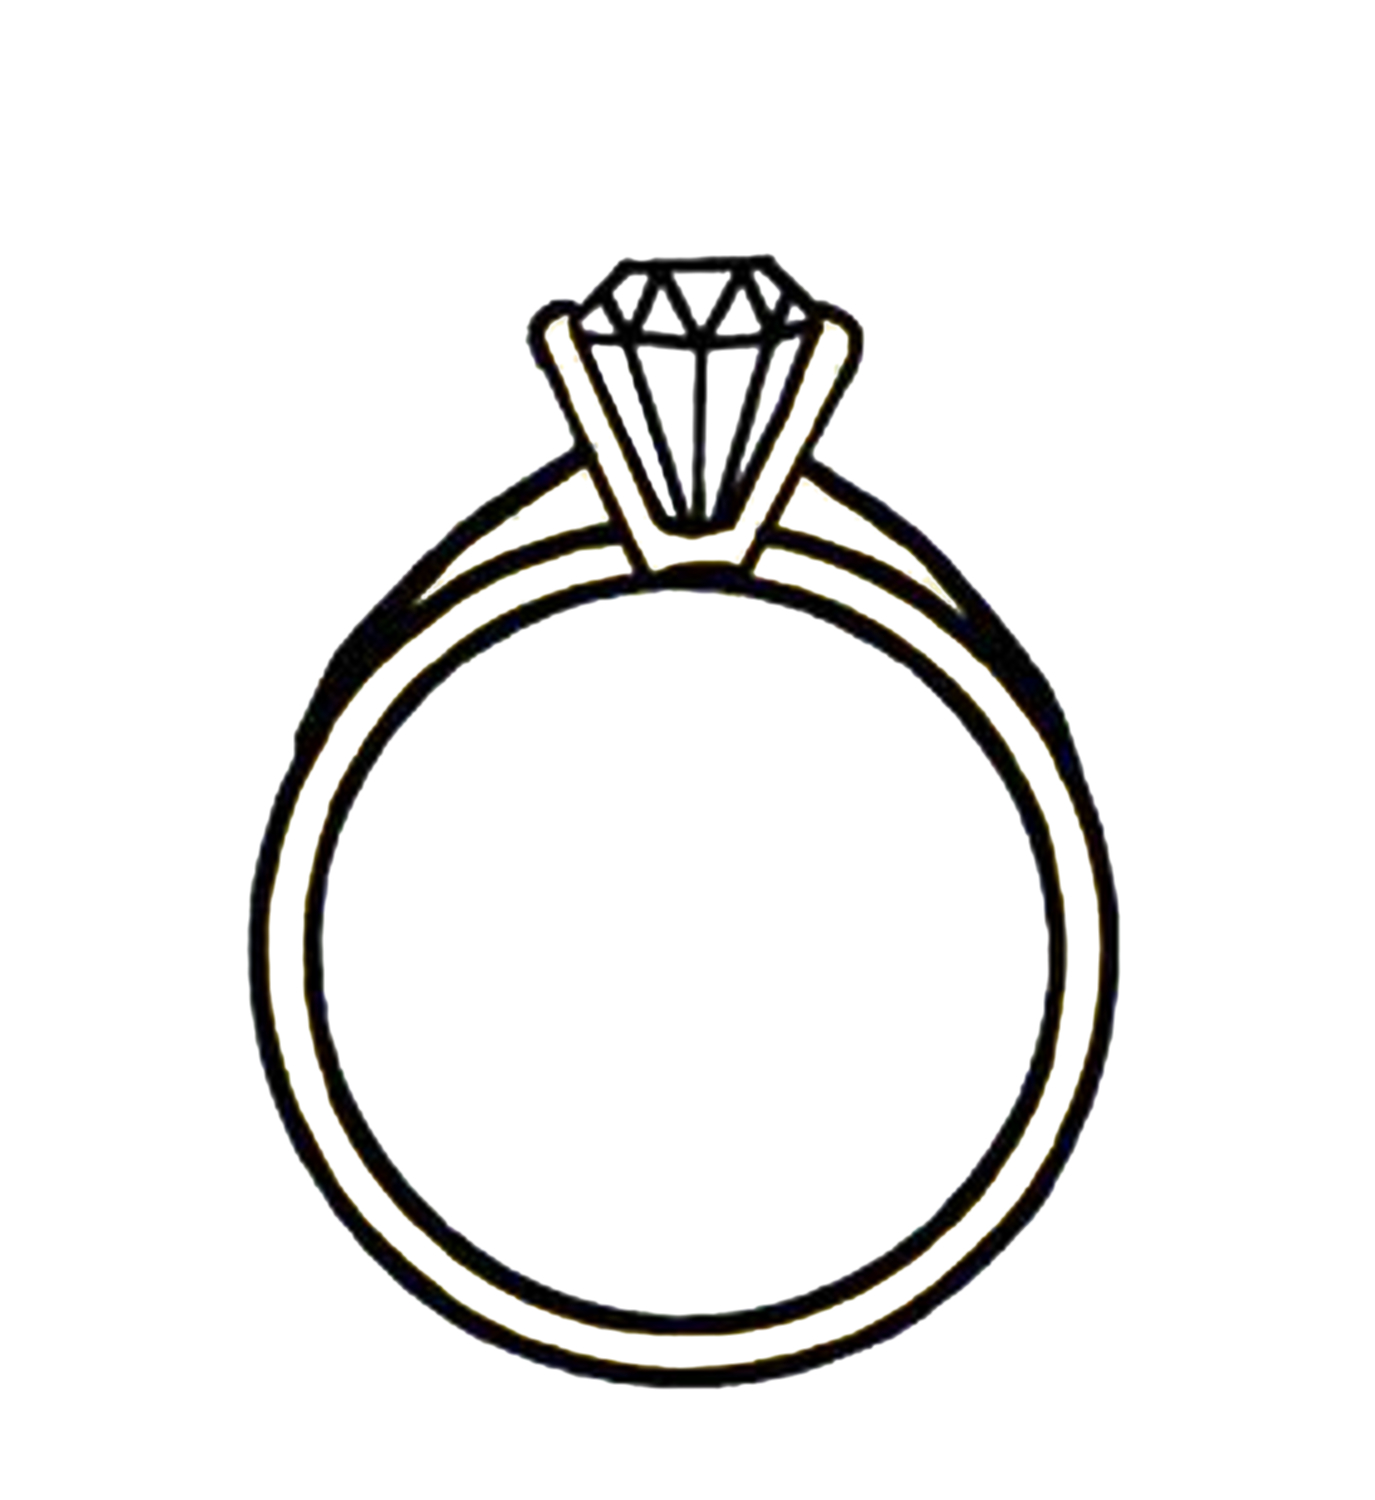 Linked wedding rings clipart free clipart images 2